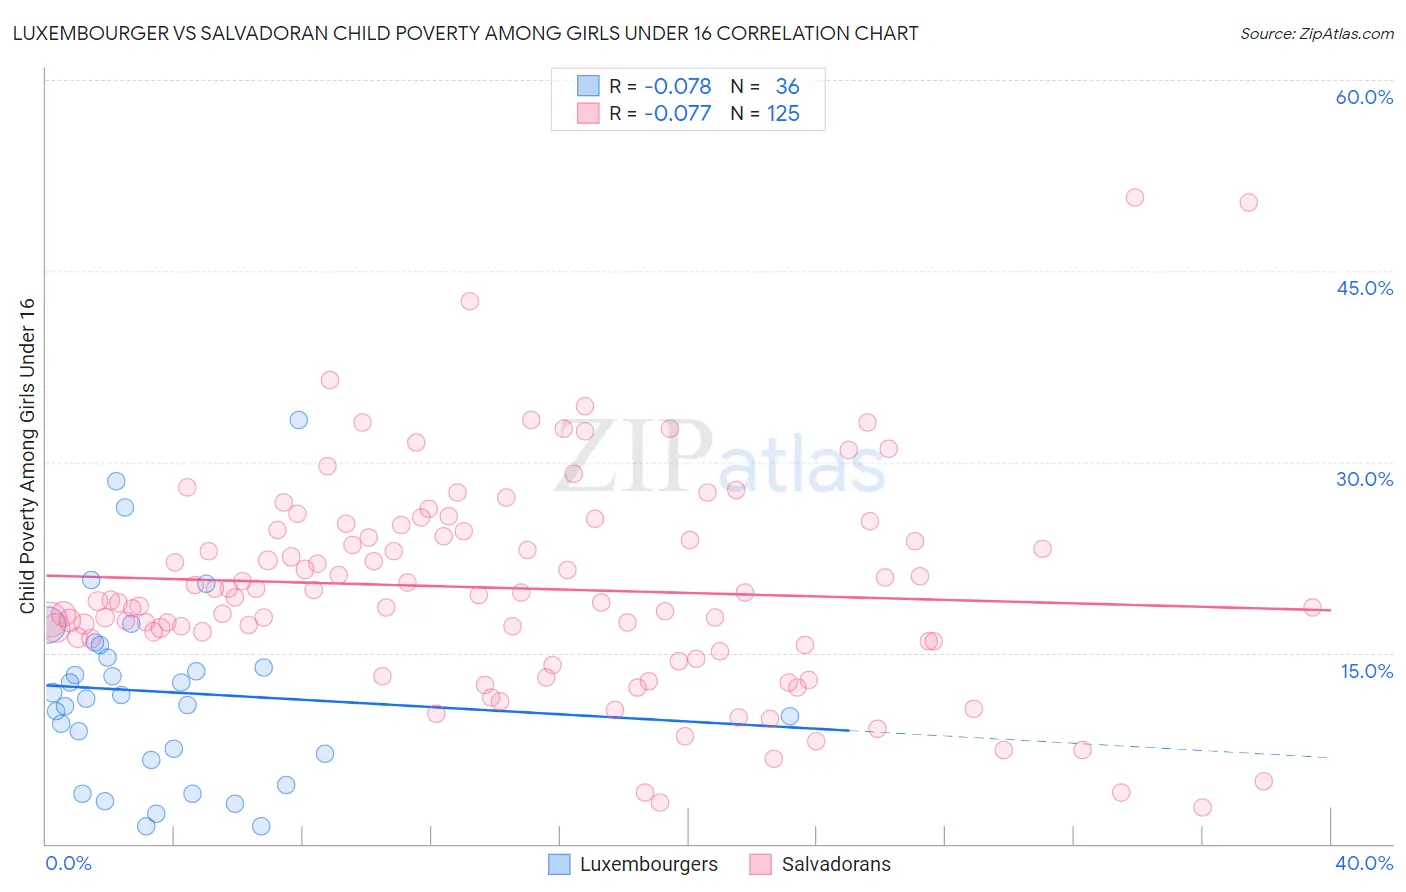 Luxembourger vs Salvadoran Child Poverty Among Girls Under 16